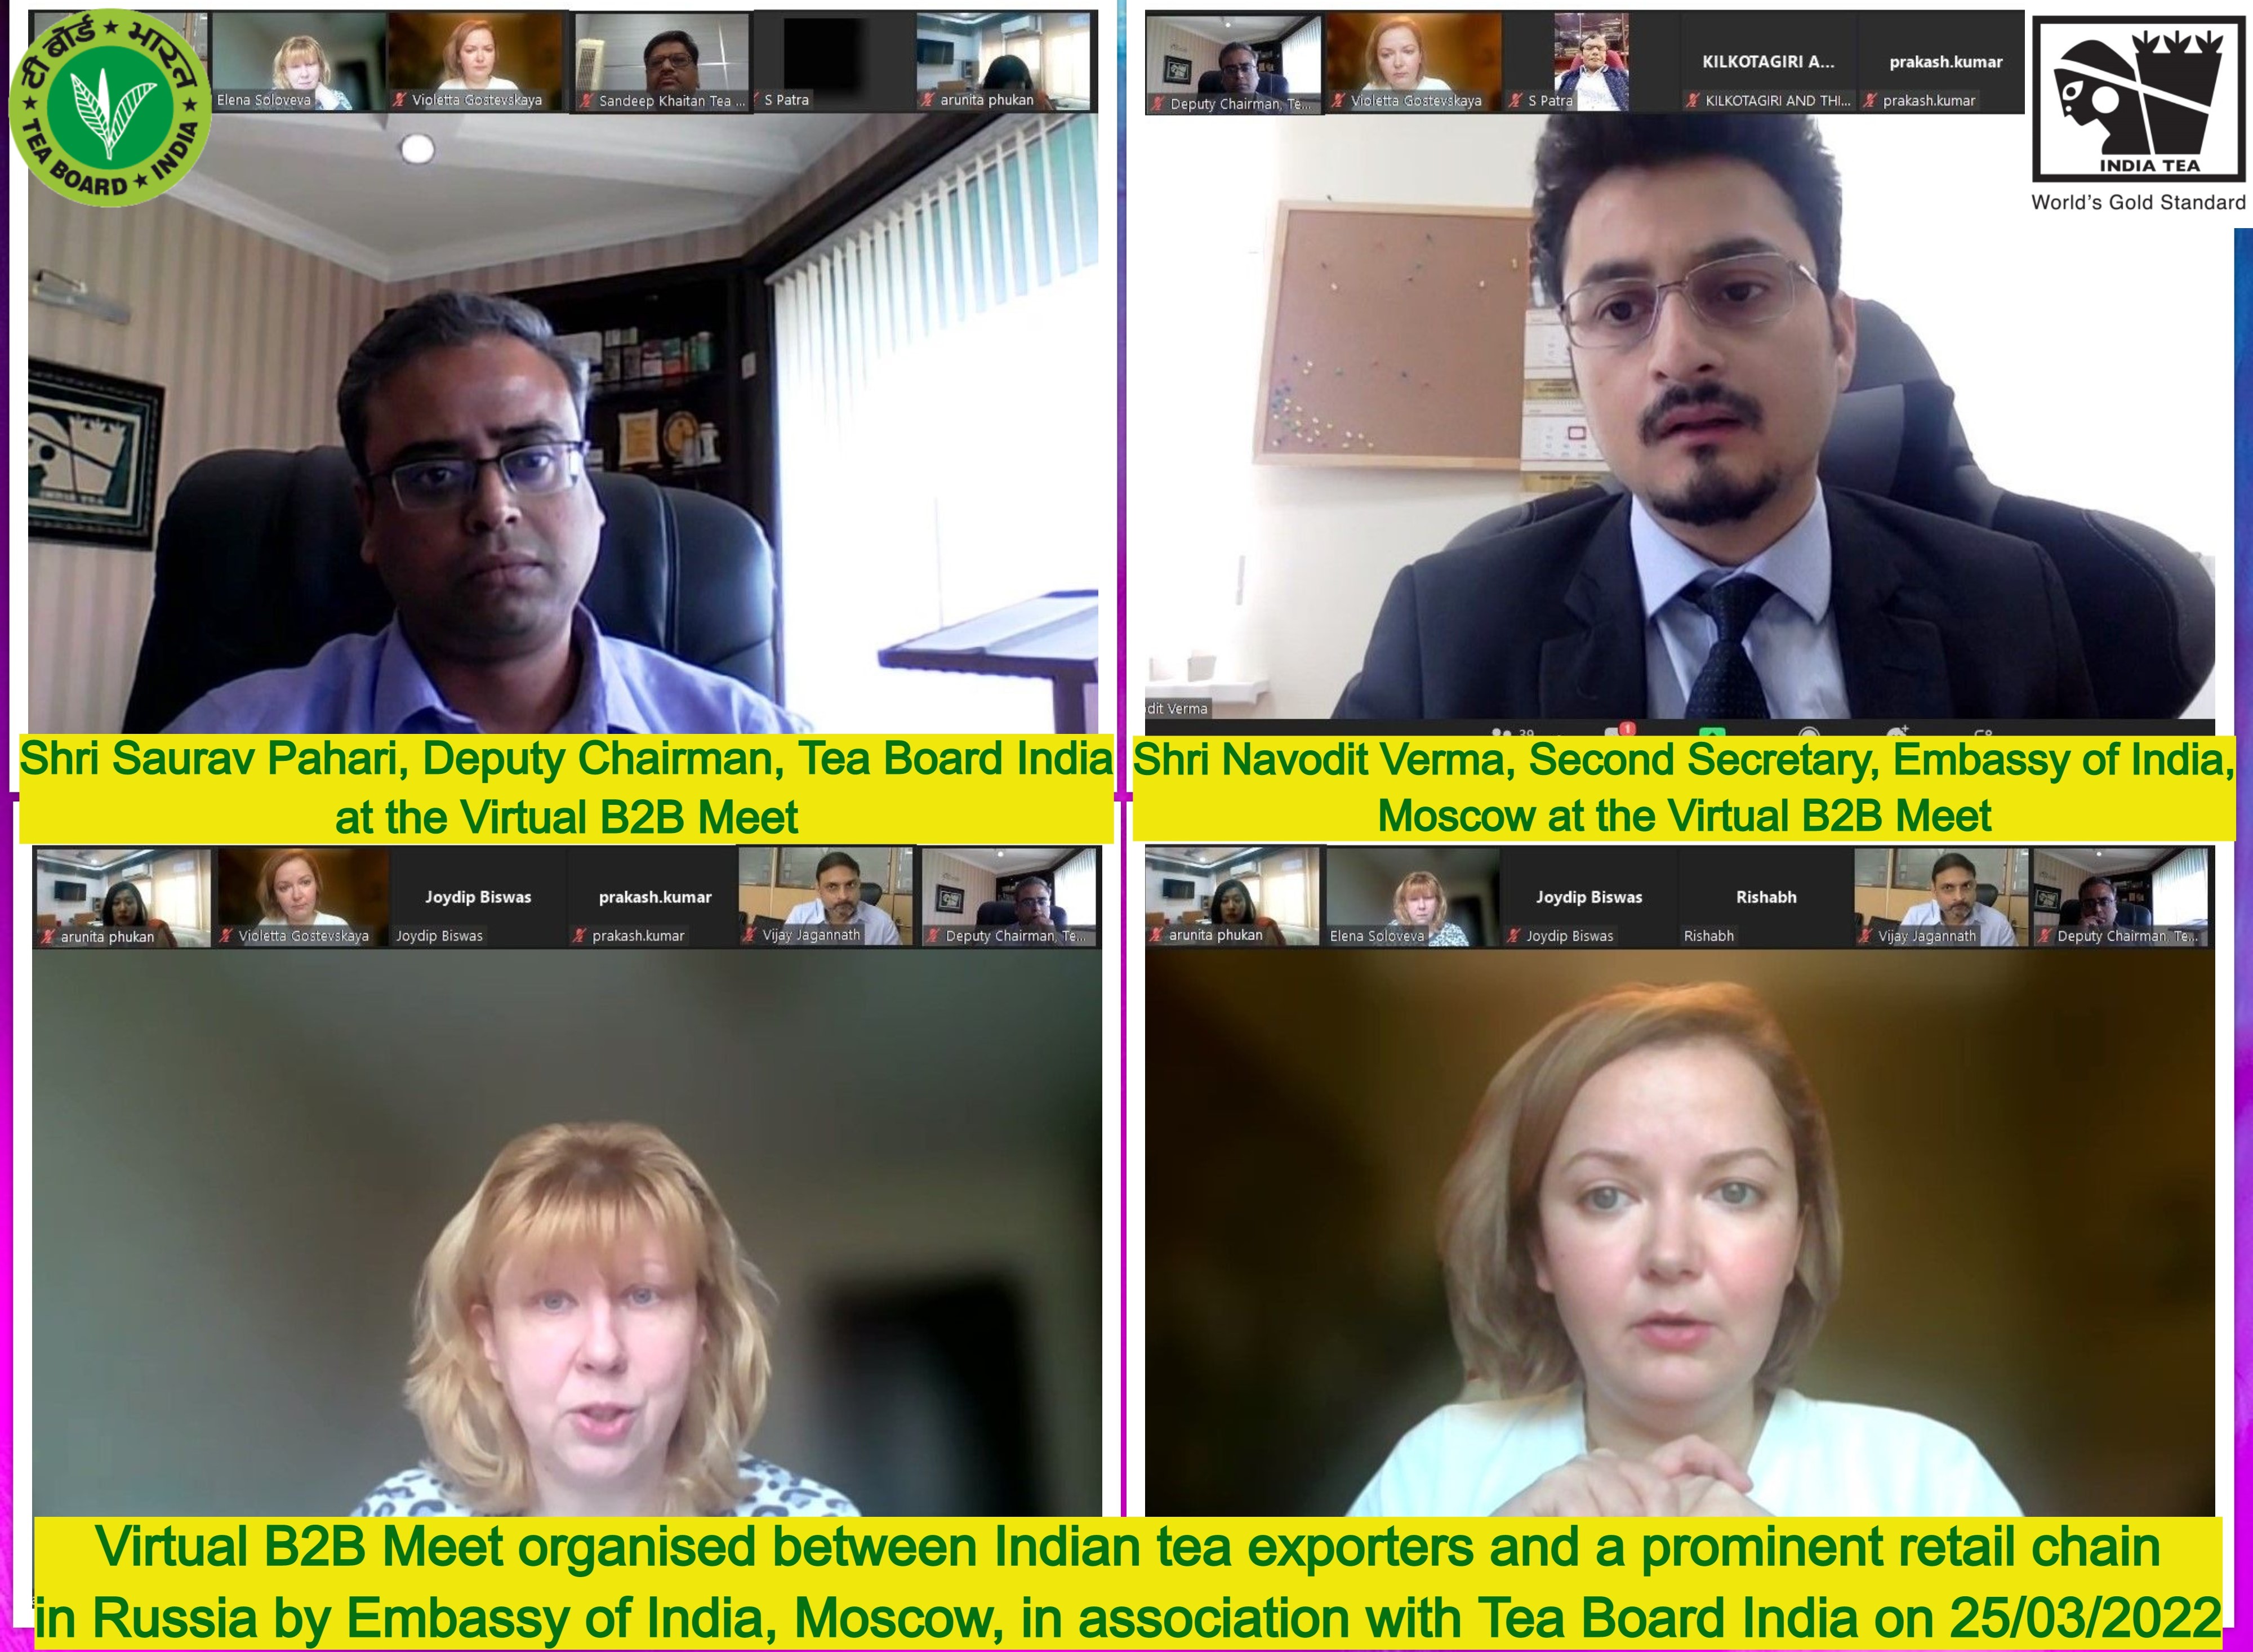 Virtual B2B Meet organised between Indian tea exporters and a prominent retail chain in Russia by Embassy of India, Moscow, in association with Tea Board India